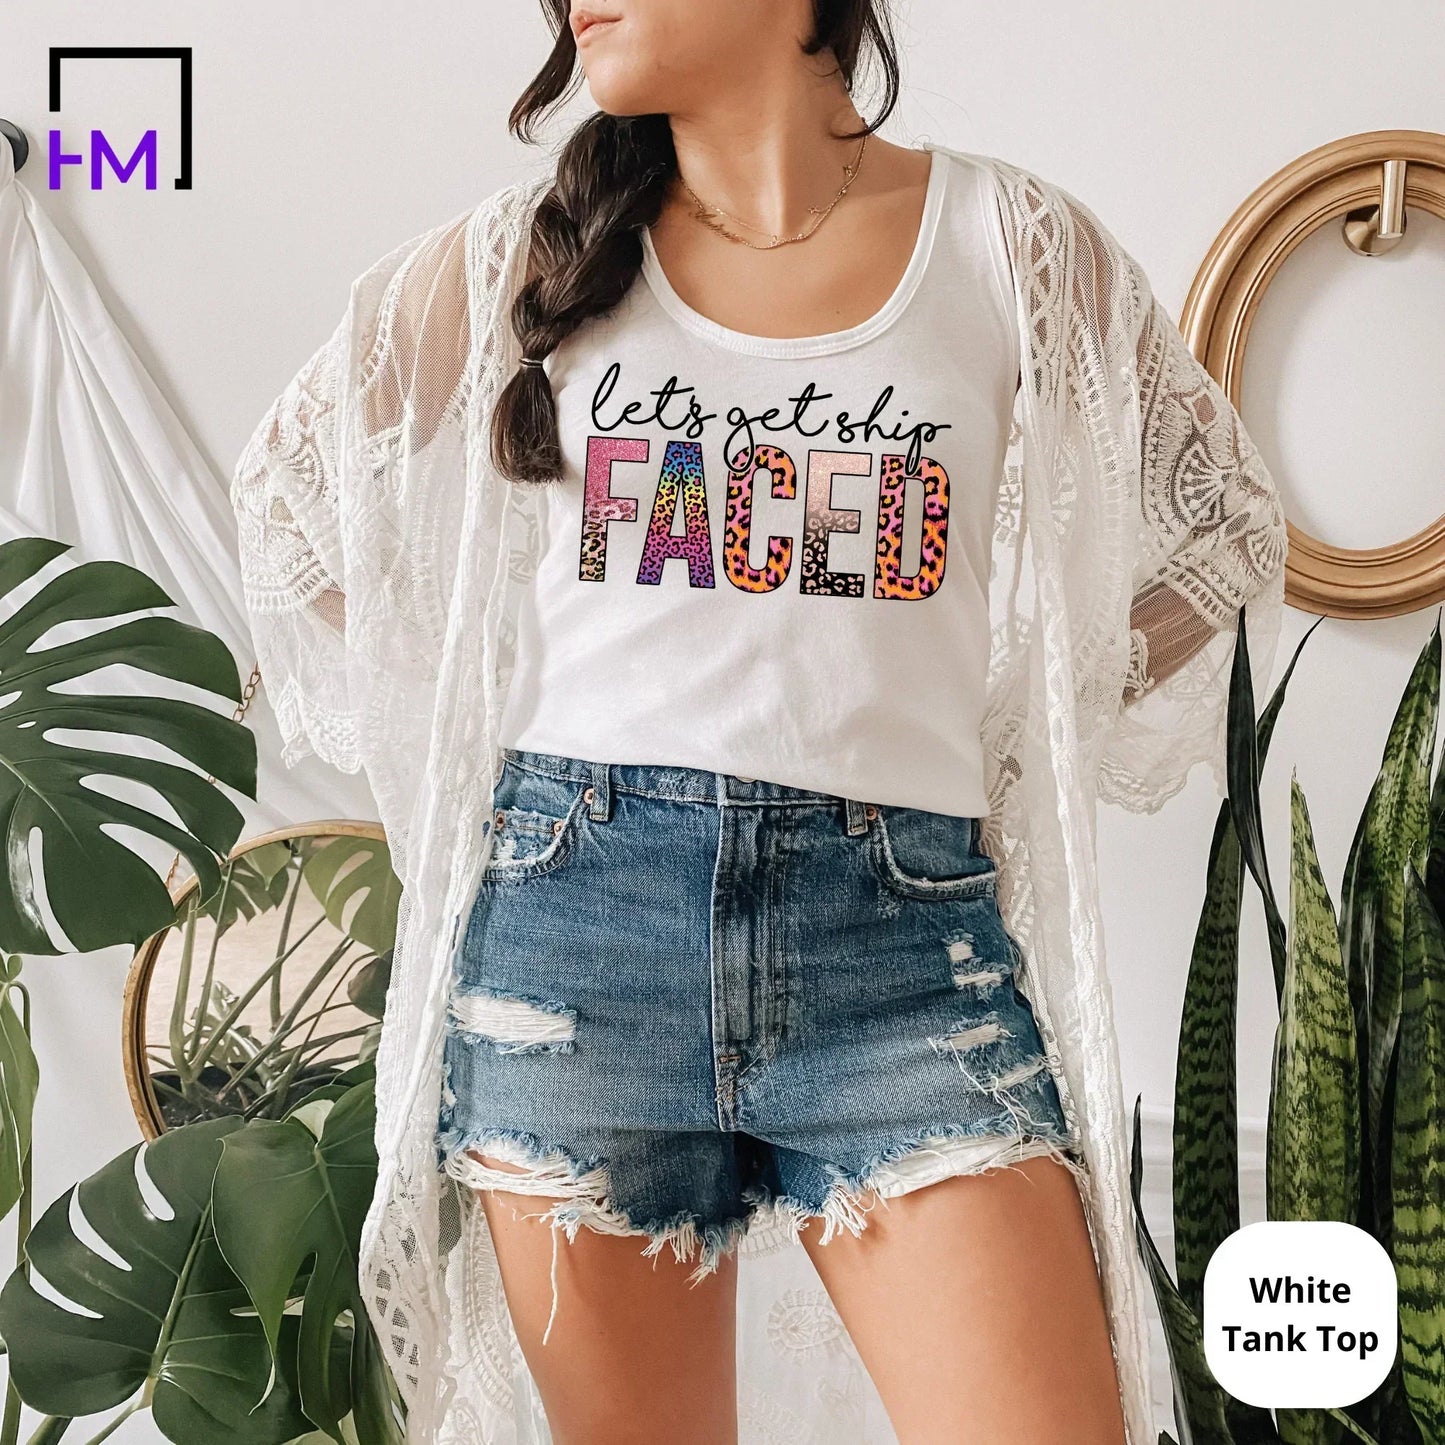 Let's Get Ship Faced, Funny Cruise Shirts for Women